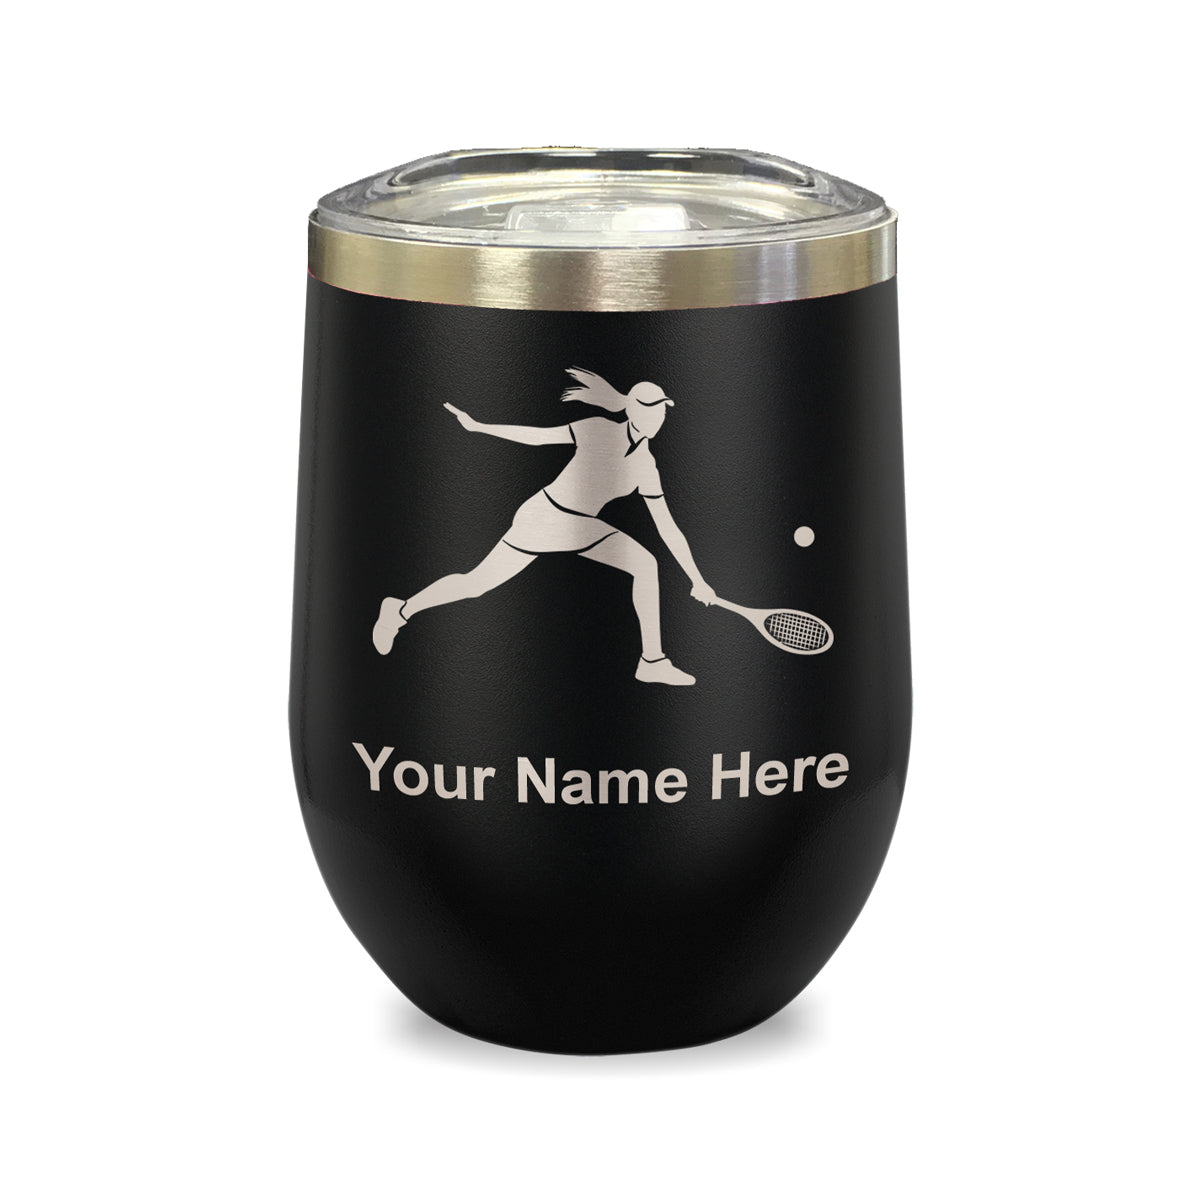 LaserGram Double Wall Stainless Steel Wine Glass, Tennis Player Woman, Personalized Engraving Included